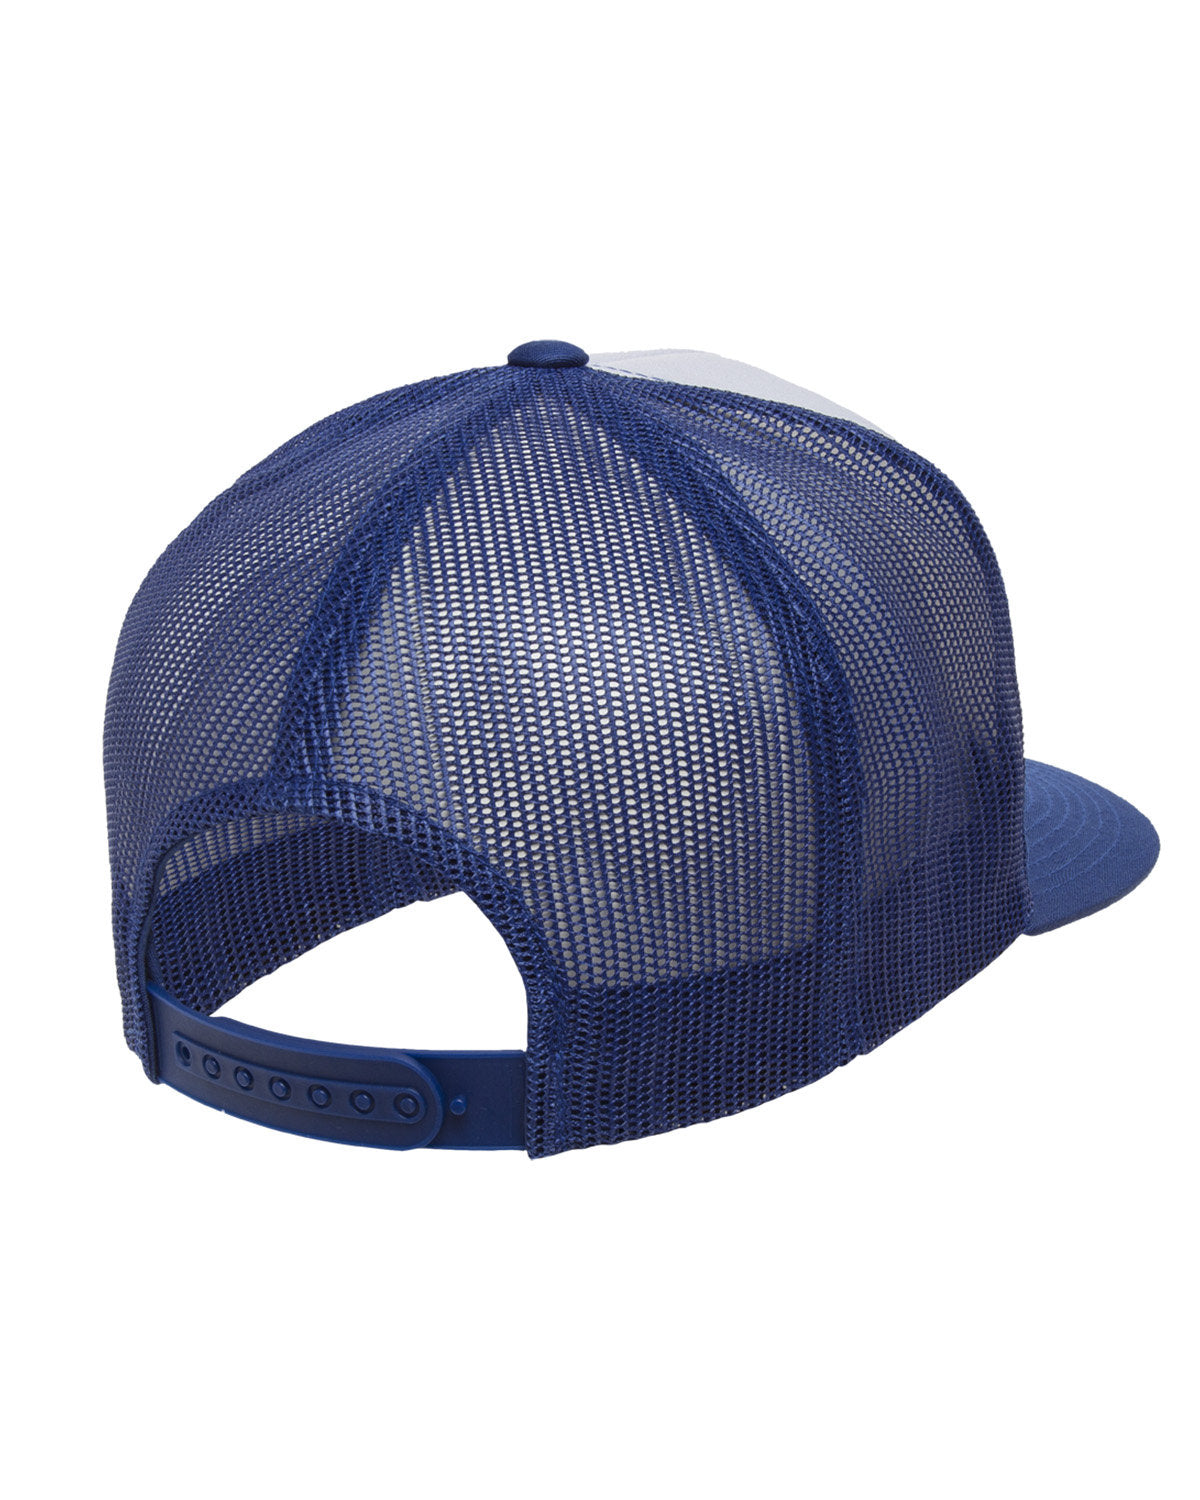 Yupoong Classic Custom Trucker With White Front Panel Caps, Royal/ White/ Royl